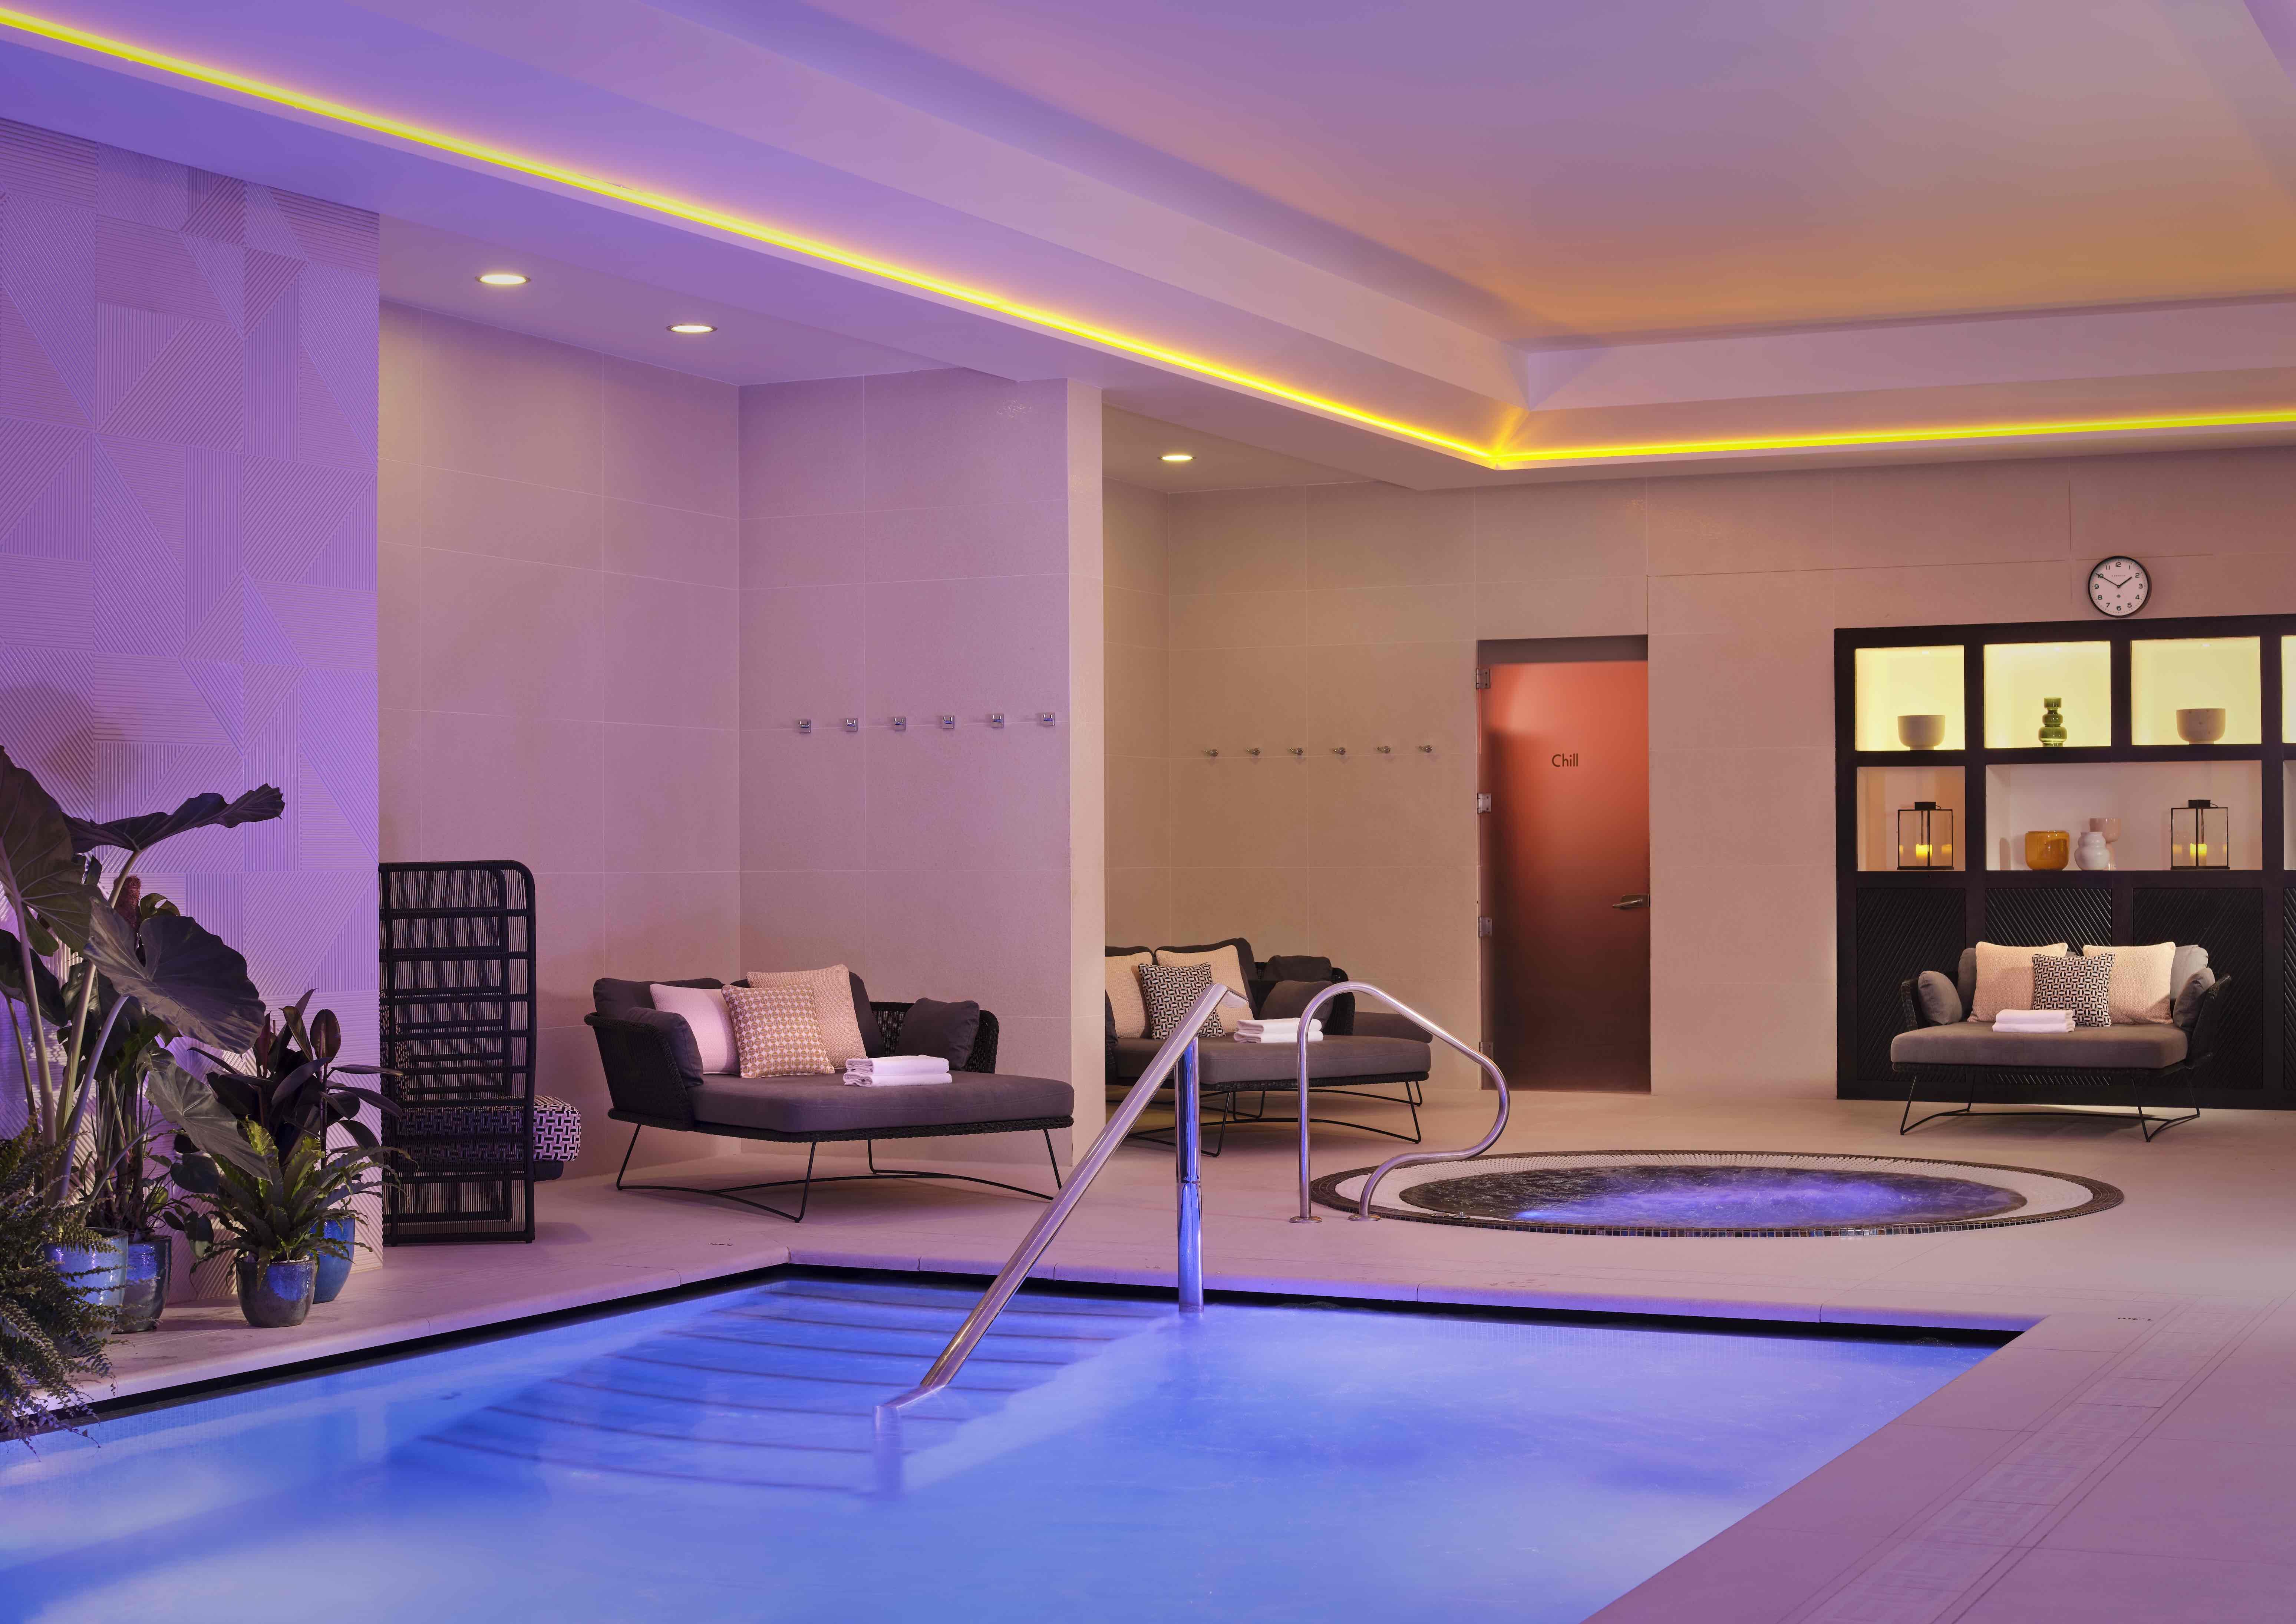 Creating an Indoor Luxury Spa Room at Home